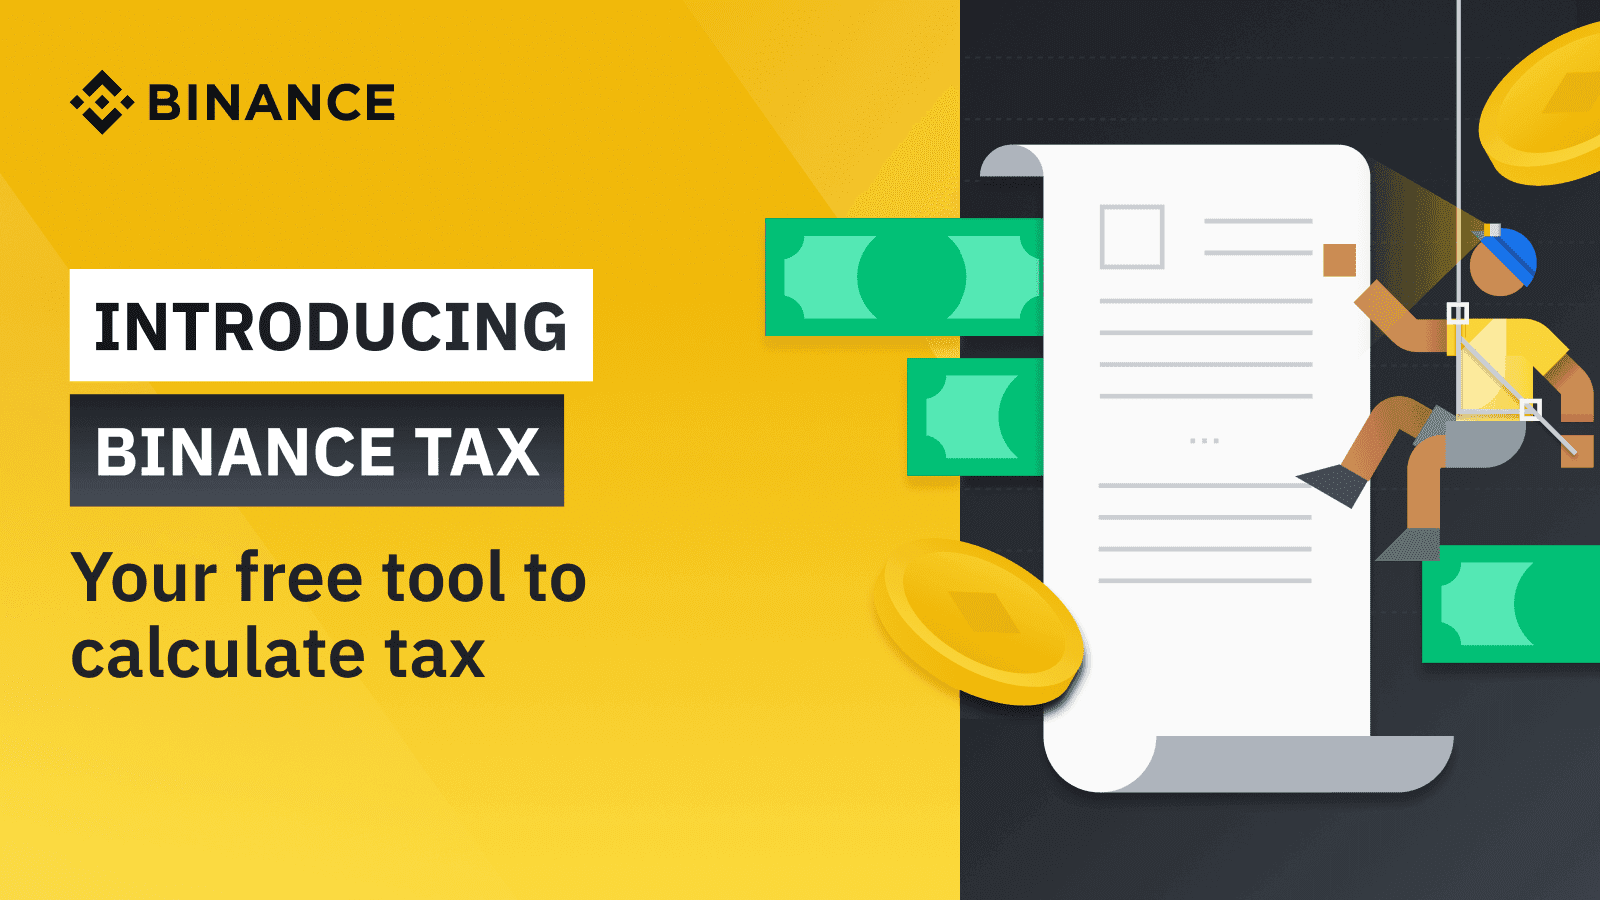 Binance Introduces Binance Tax to Ease Tax Complications